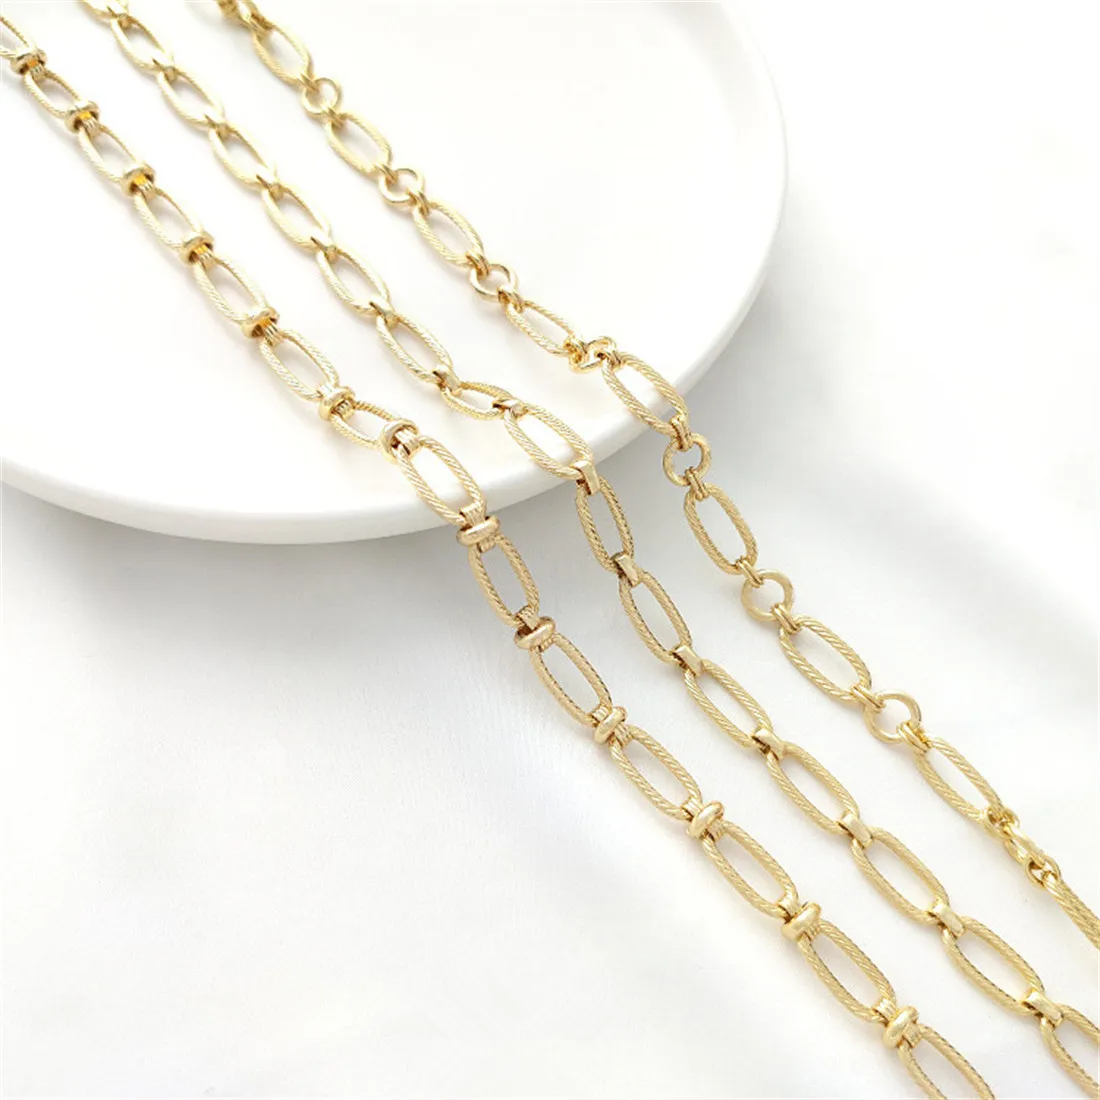 14K Gold Wrapped Oval Fried Dough Twists Chain Manual Long O-ring Chain Diy Bracelet Necklace Jewelry Hand Made Loose Chain B671 1000pcs 10mm 50mm gray adhesive scratch off sticker diy manual hand made scratch card